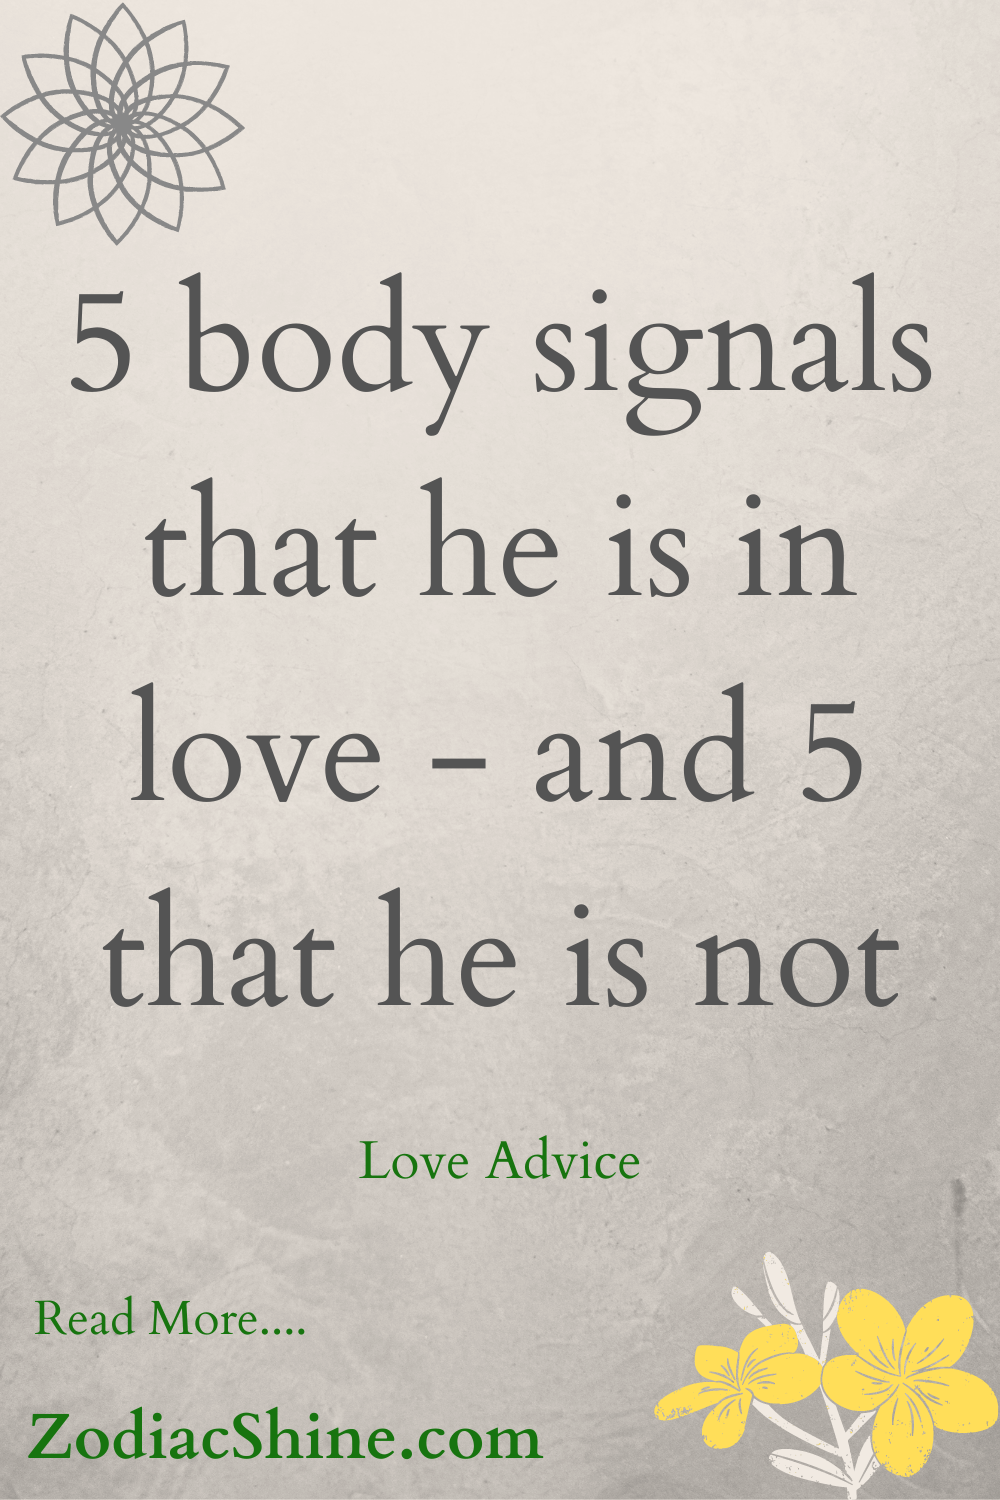 5 body signals that he is in love - and 5 that he is not